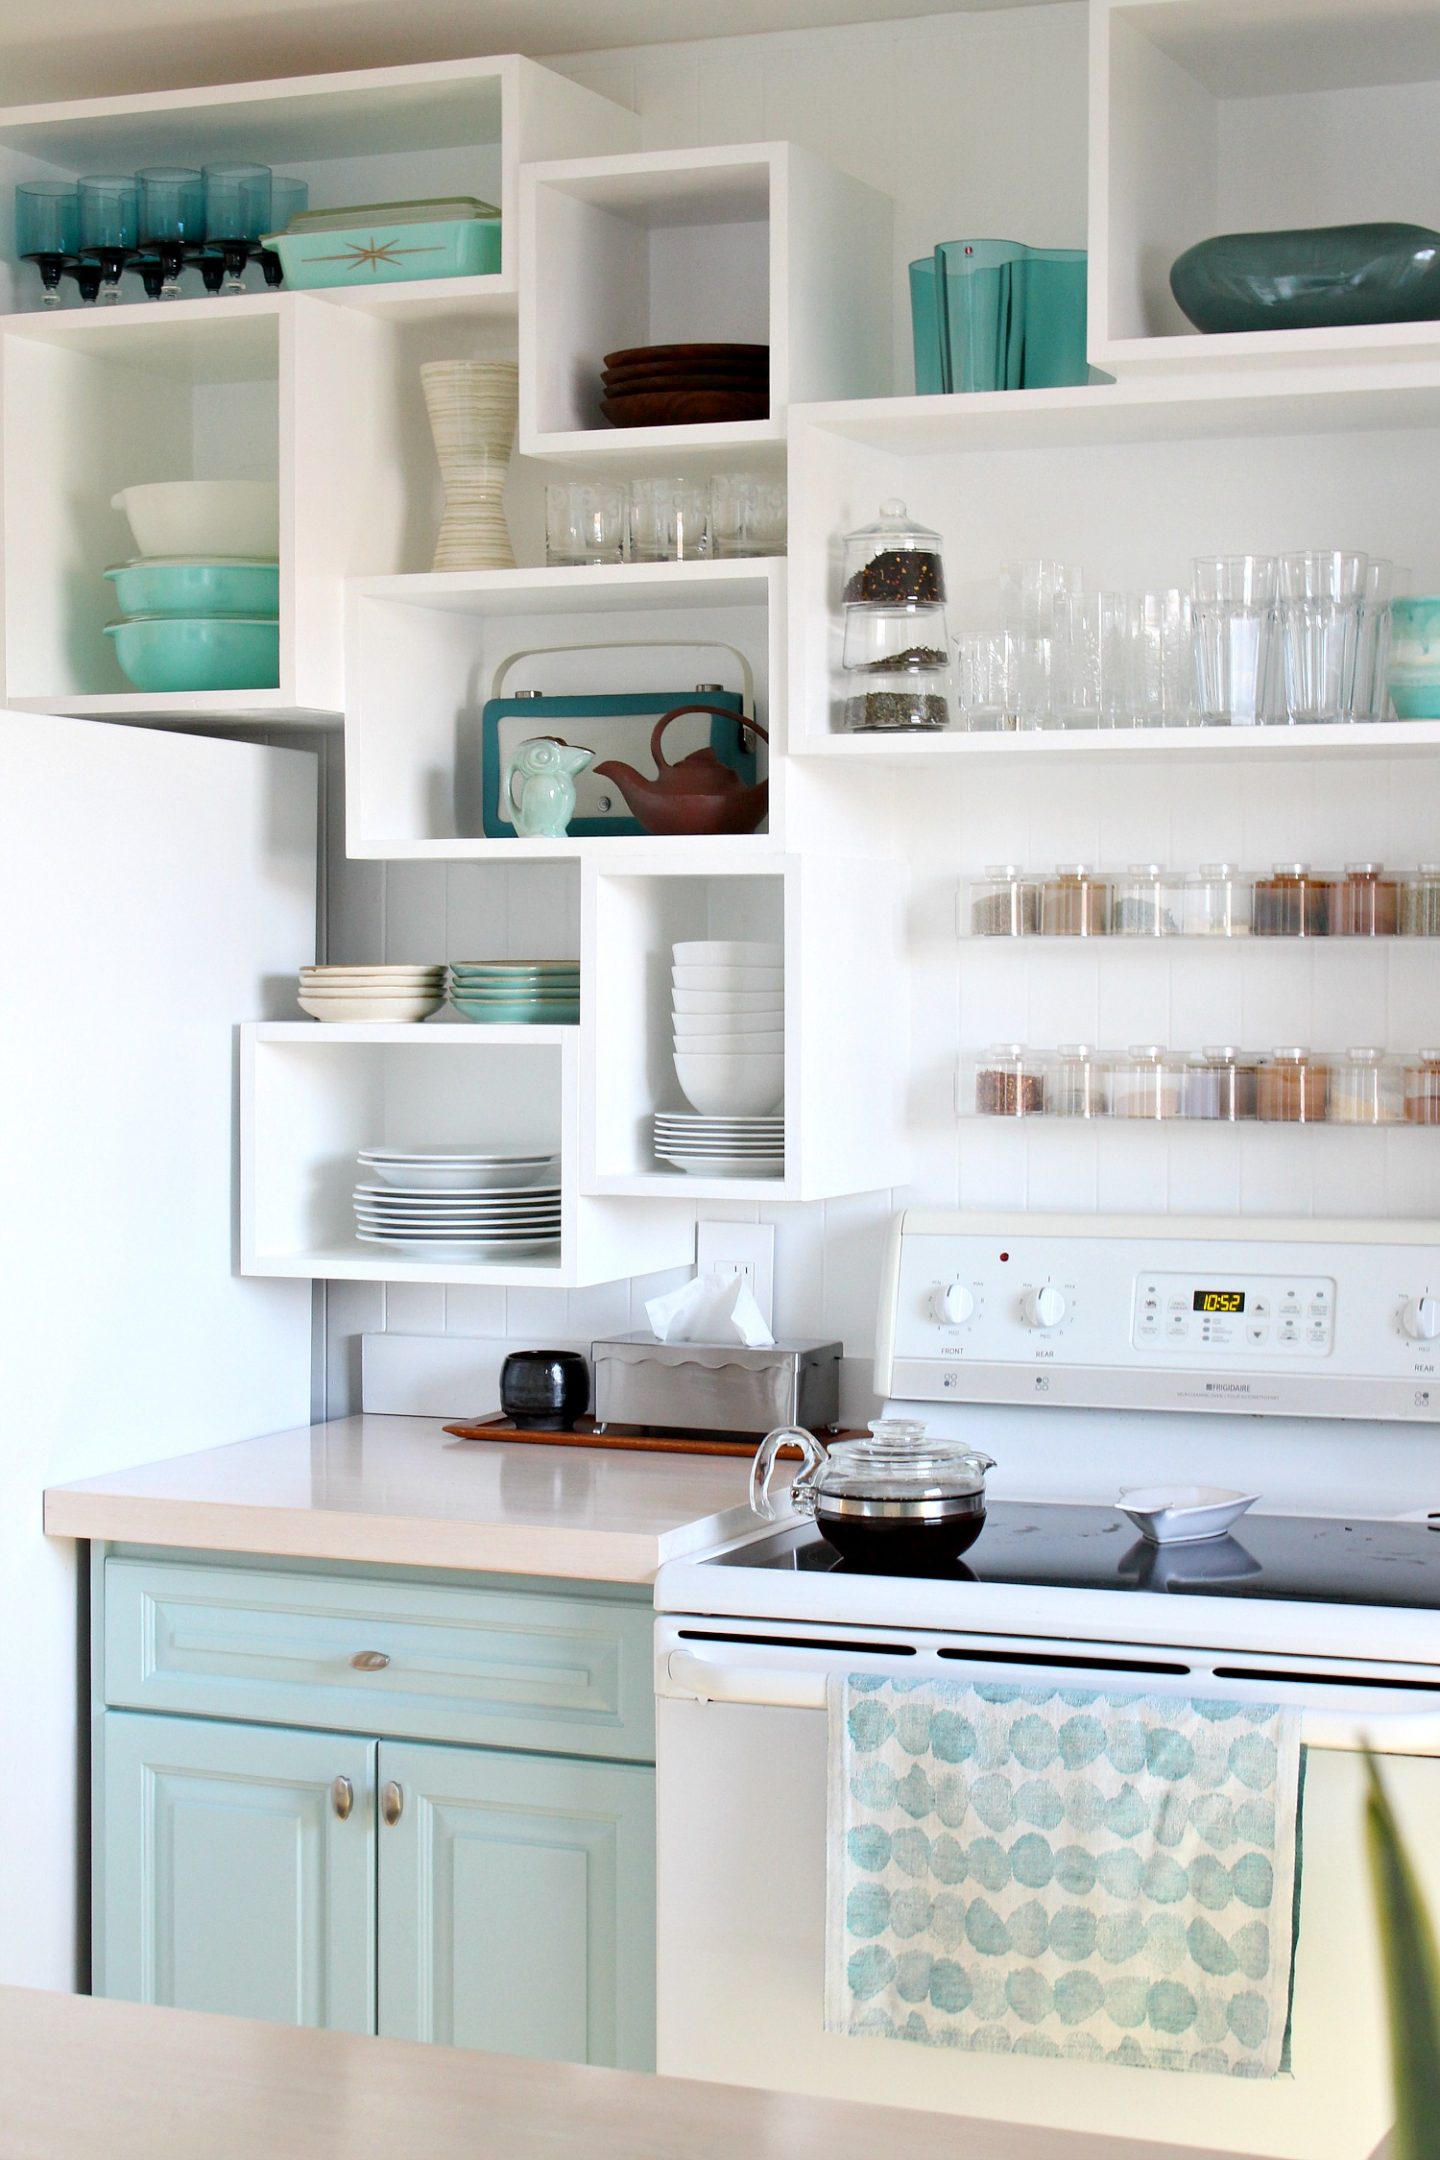 Surprise! Sherwin Williams Watery Cabinet Color + This DIY Kitchen ...